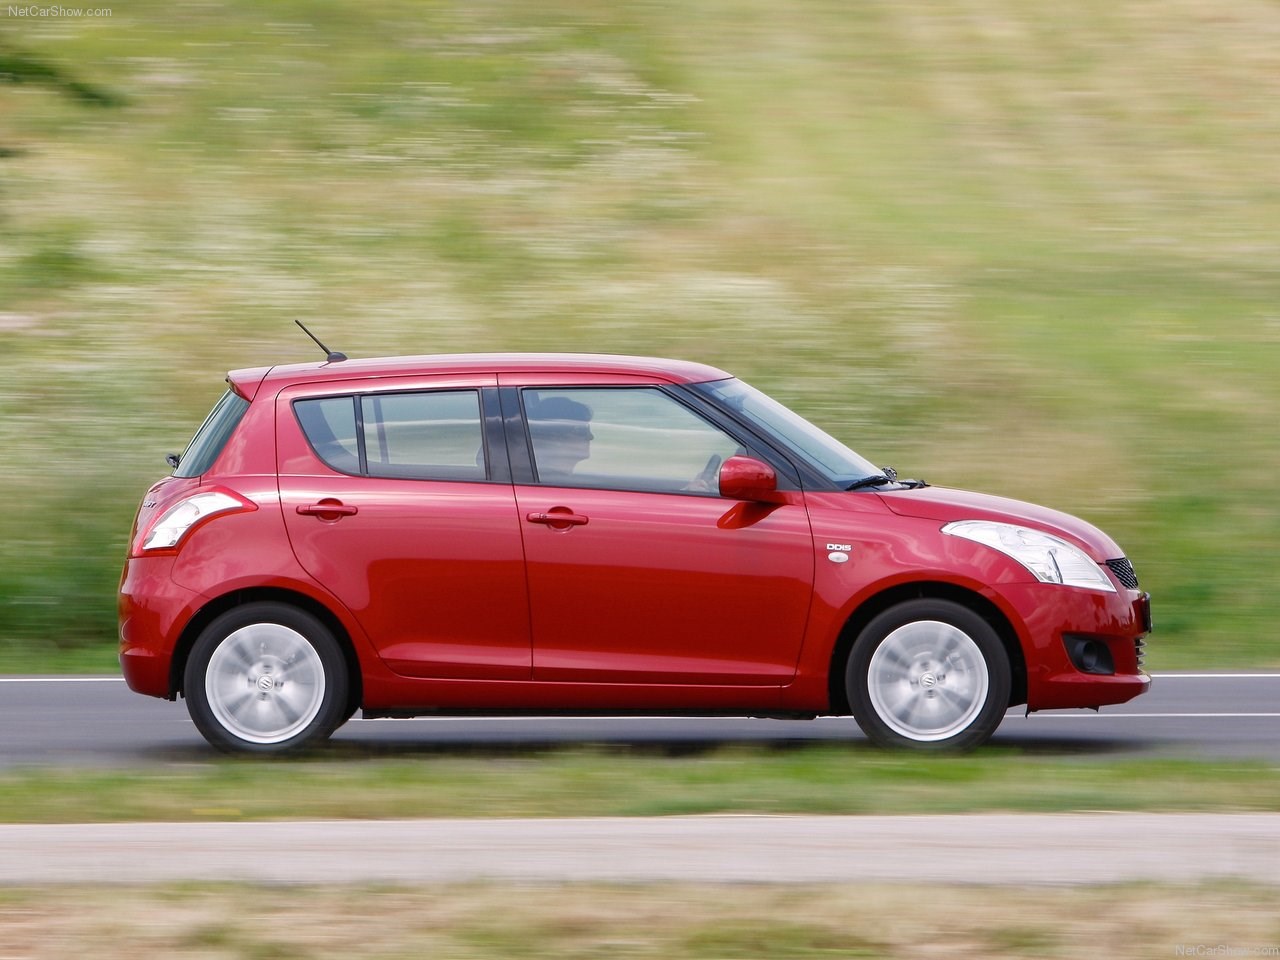 USED CAR GURU: Our top tips for buying a used Suzuki Swift